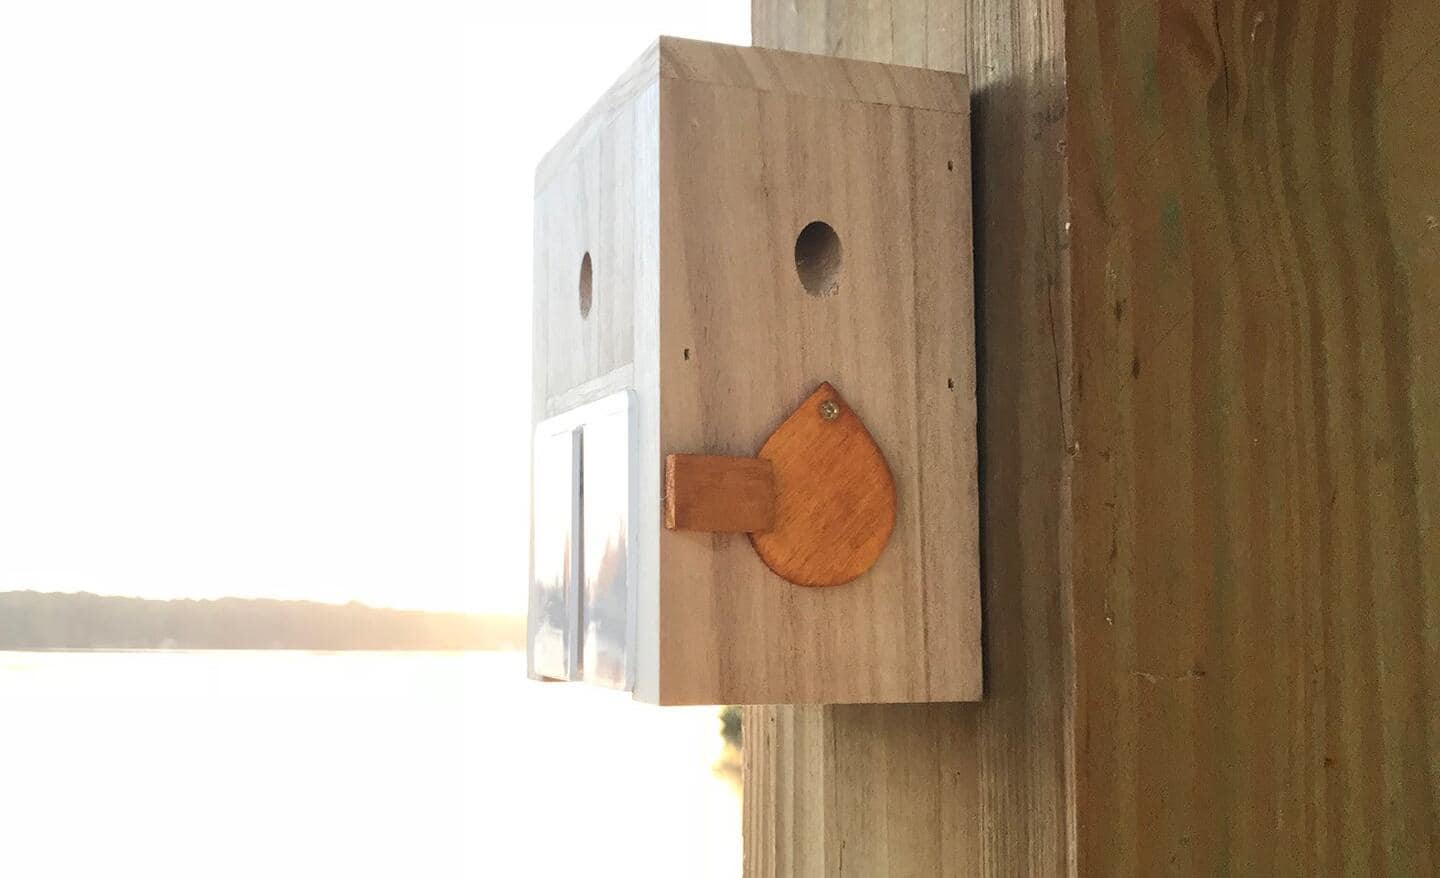 A carpenter bee trap hangs from a wooden rafter.